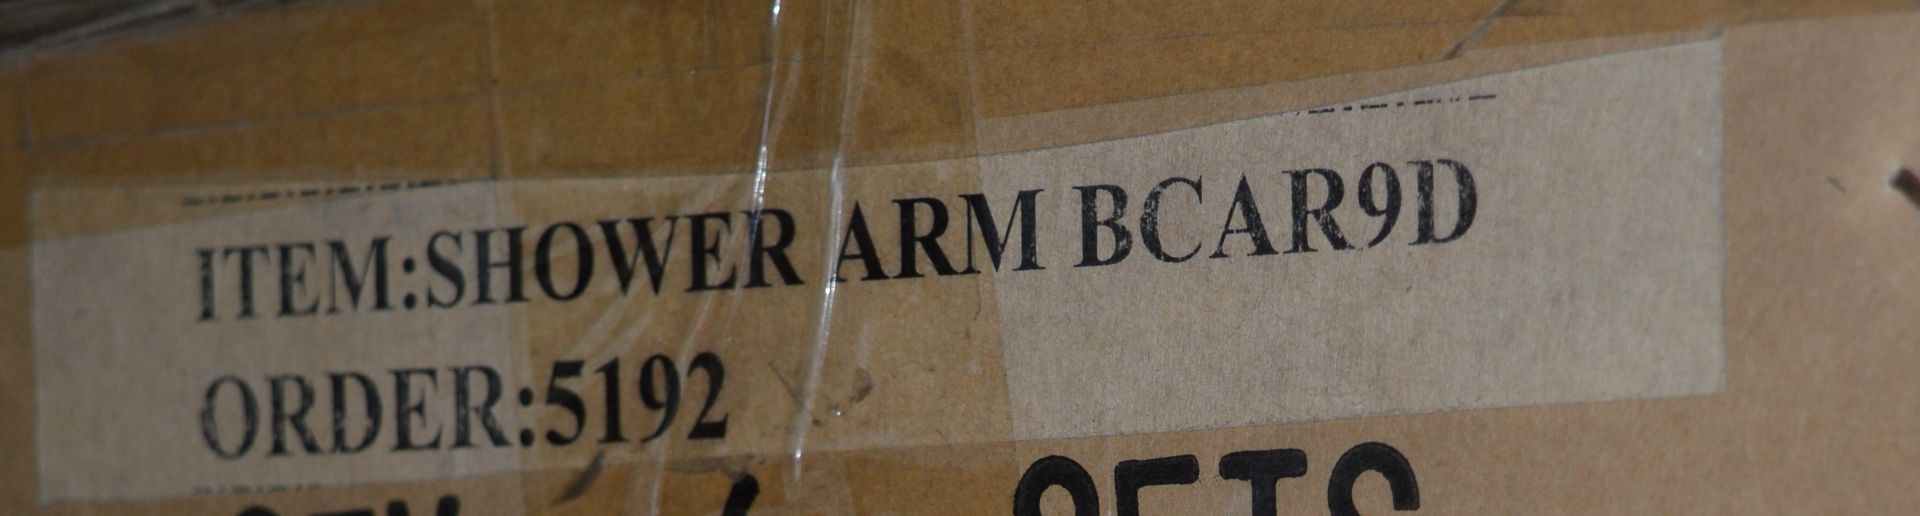 10 x Carmina Shower Arms - Solid Brass With Chrome Finish - Brand New Boxed Stock - Approx RRP £ - Image 2 of 4